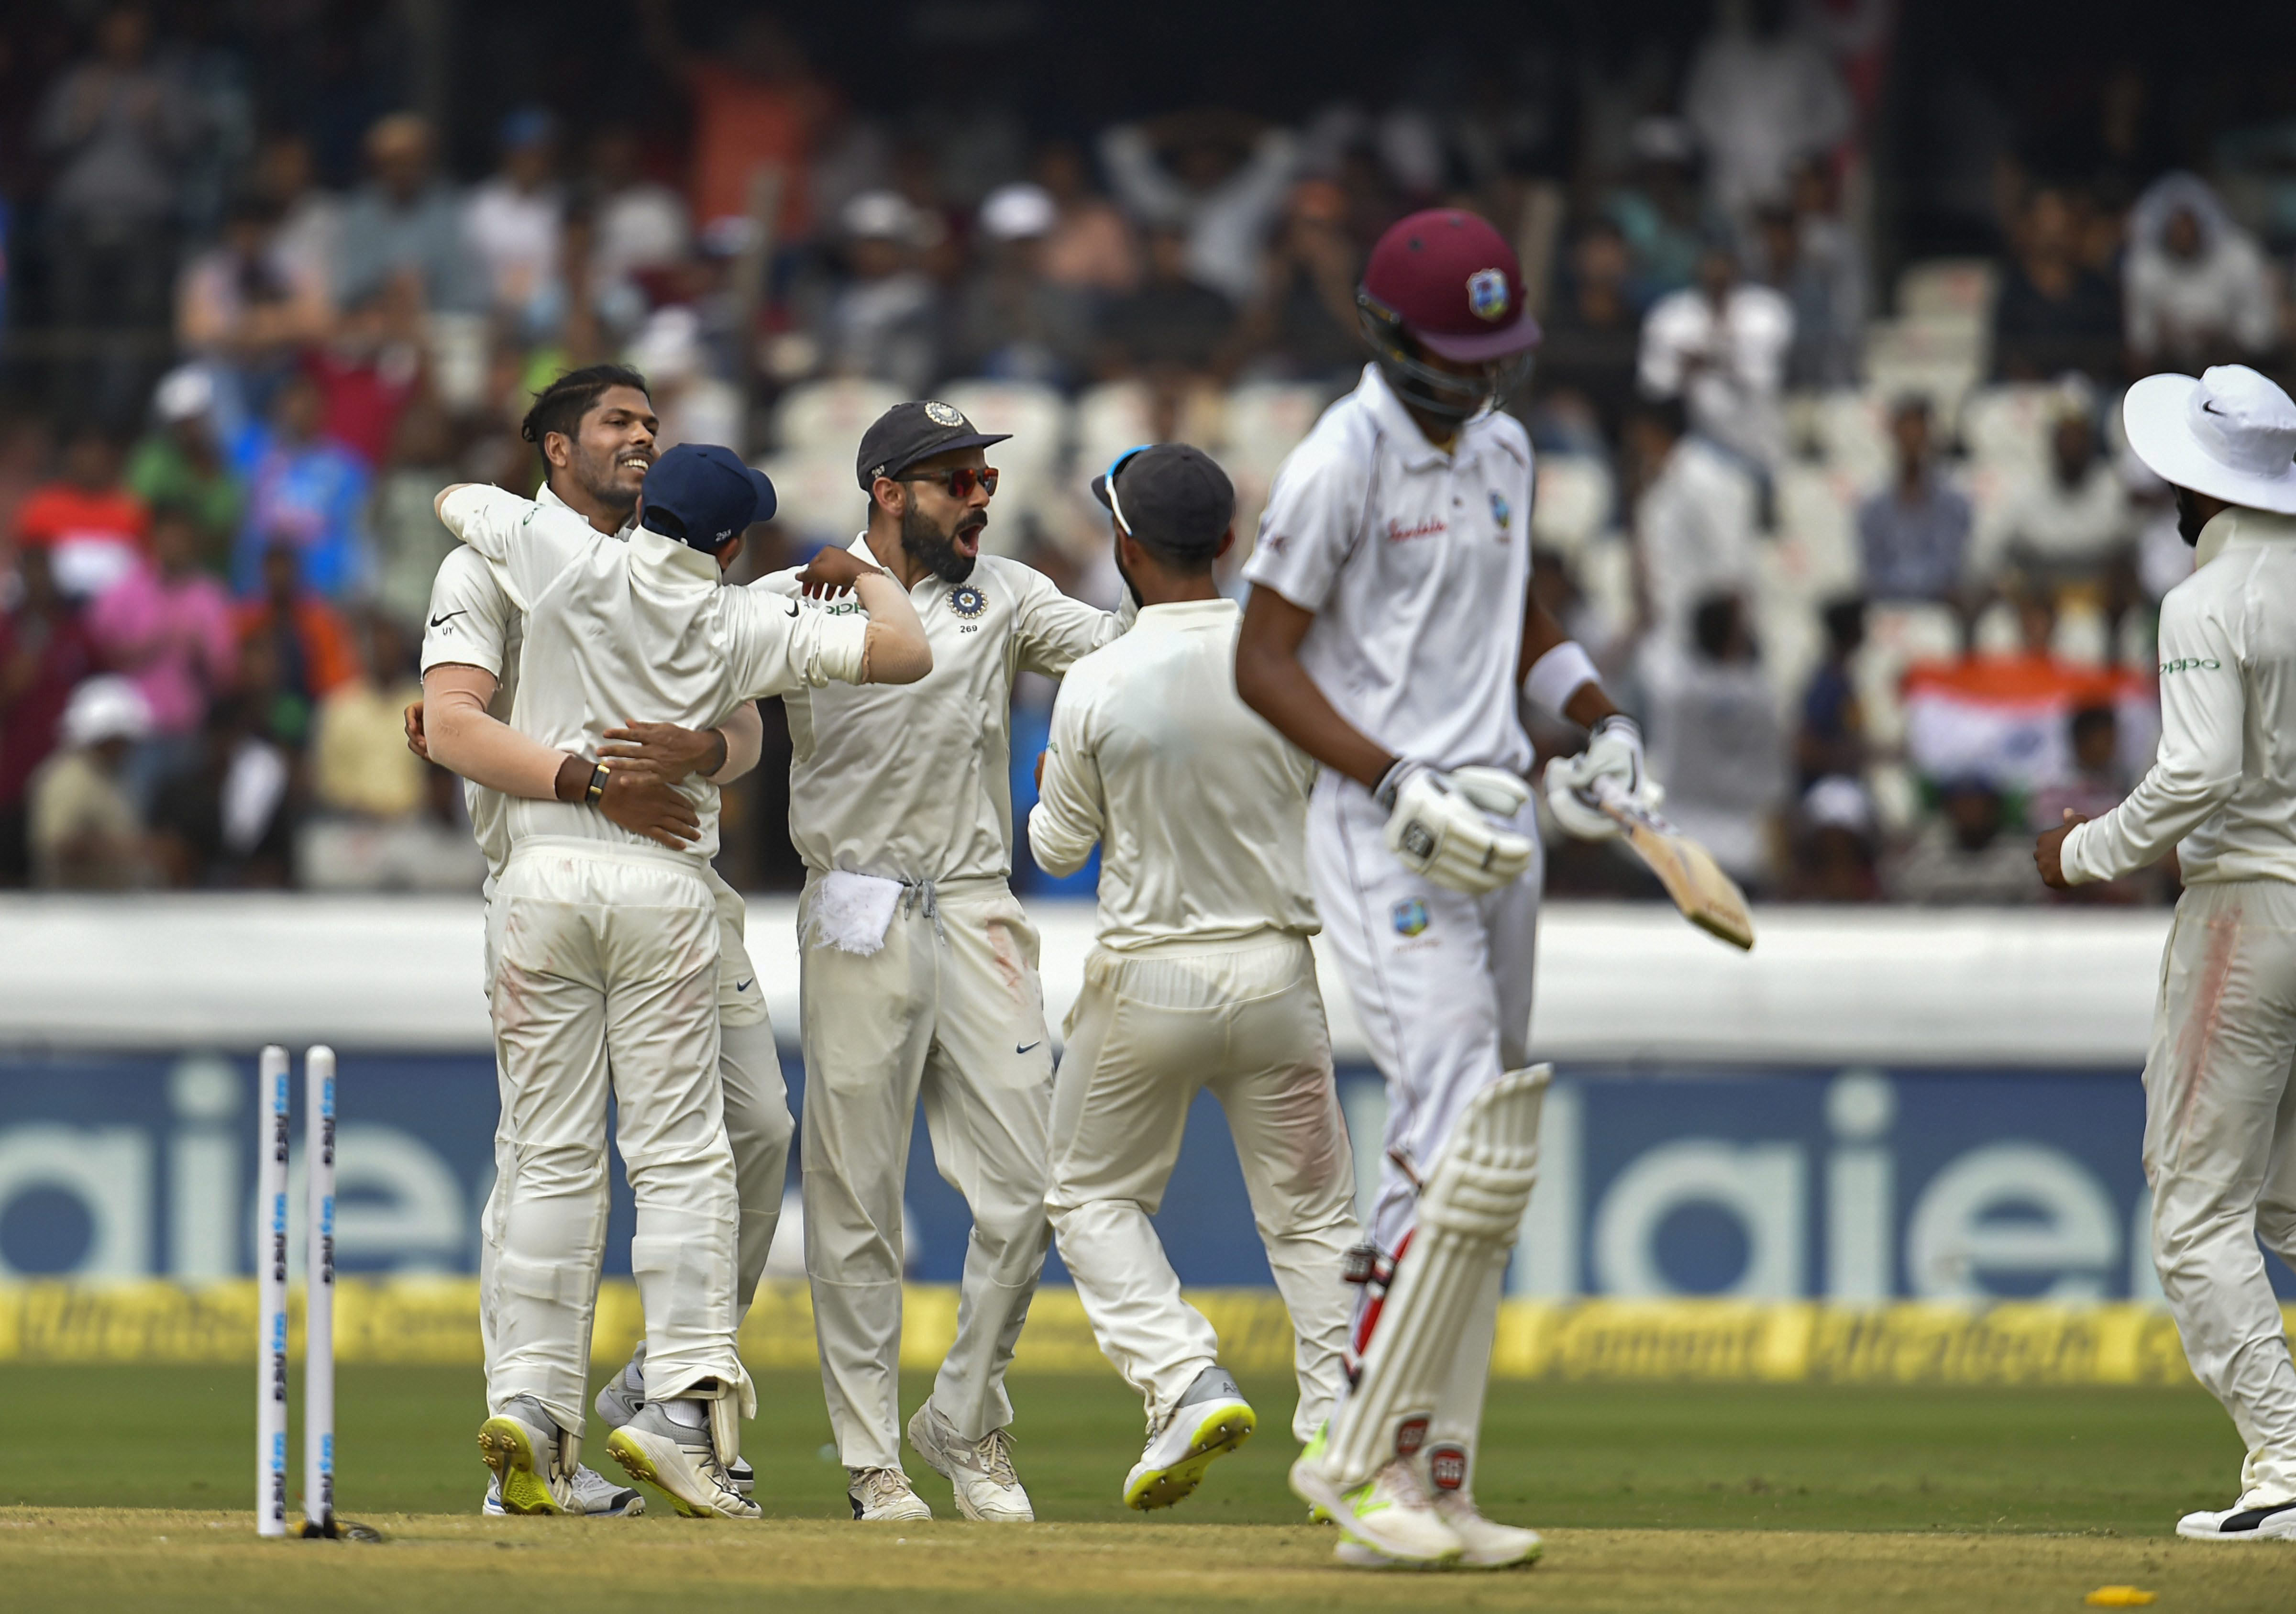 India vs West Indies 2nd Test, Day 3 Live cricket score, updates and